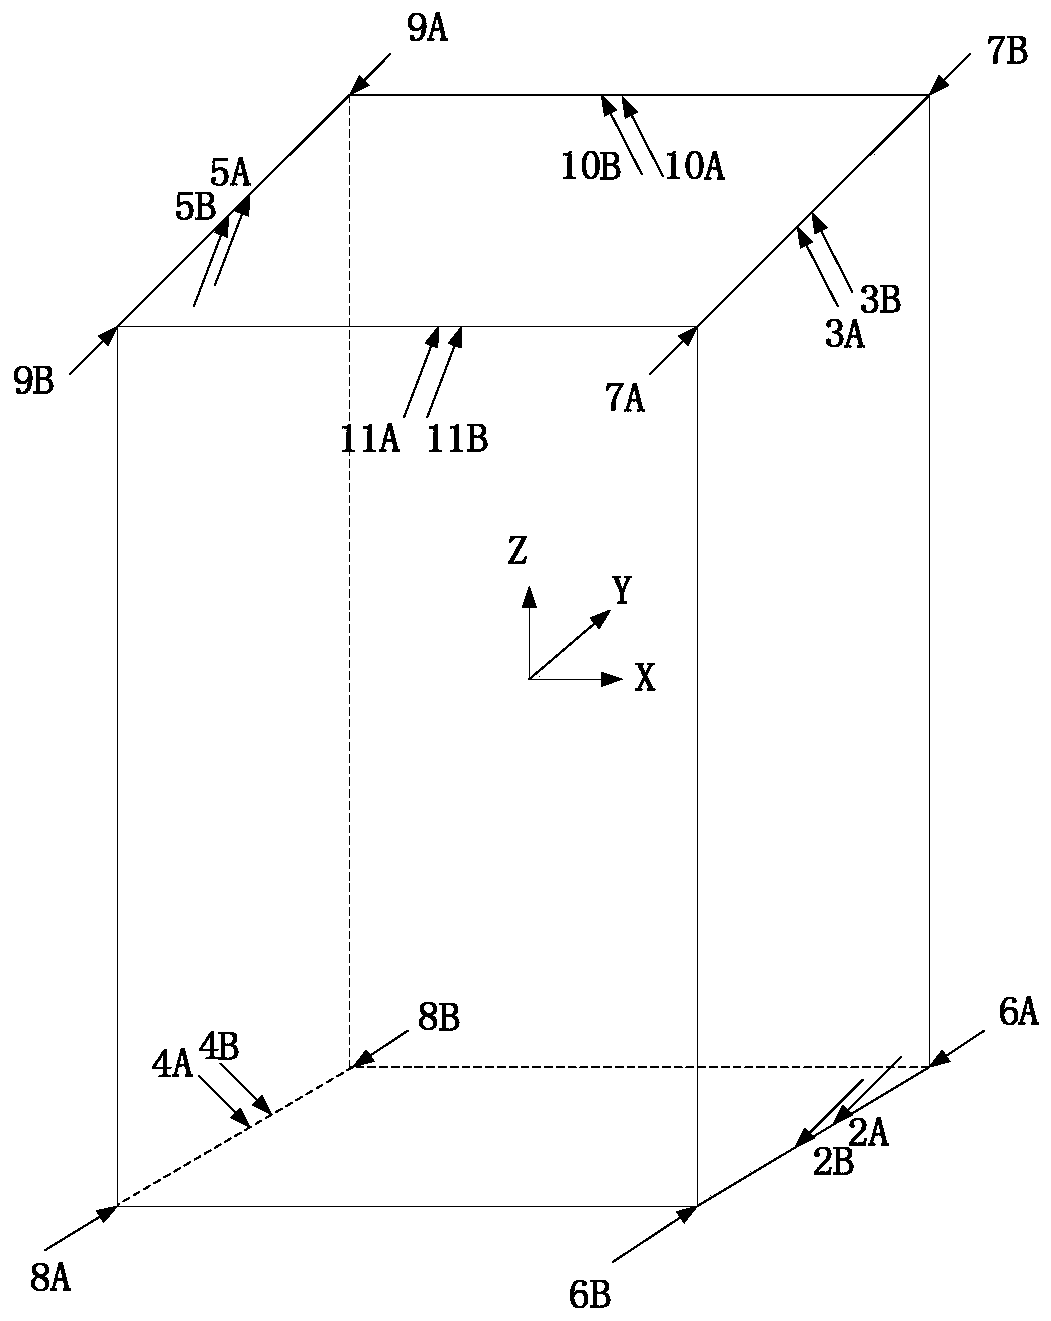 Thruster layout of aircraft and aircraft position protection method based on layout